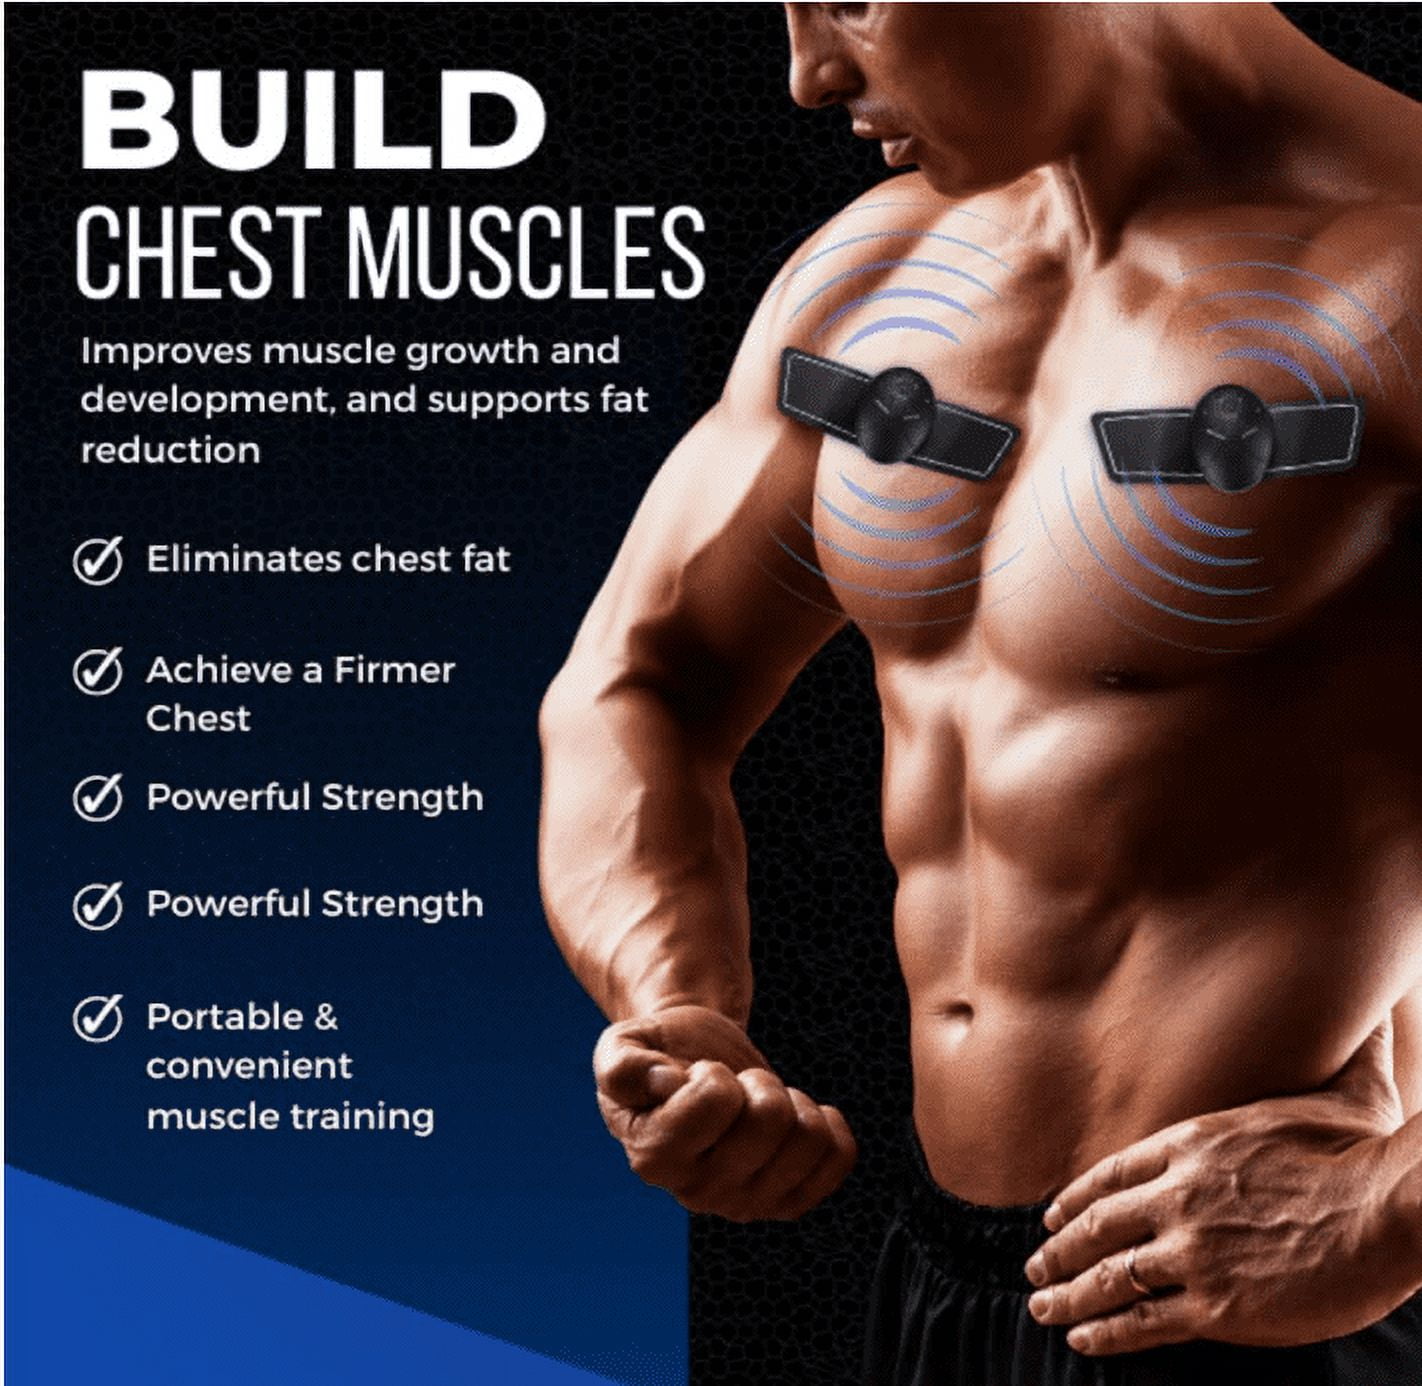 Importance of well developed pecs for men, by digitalwave.one